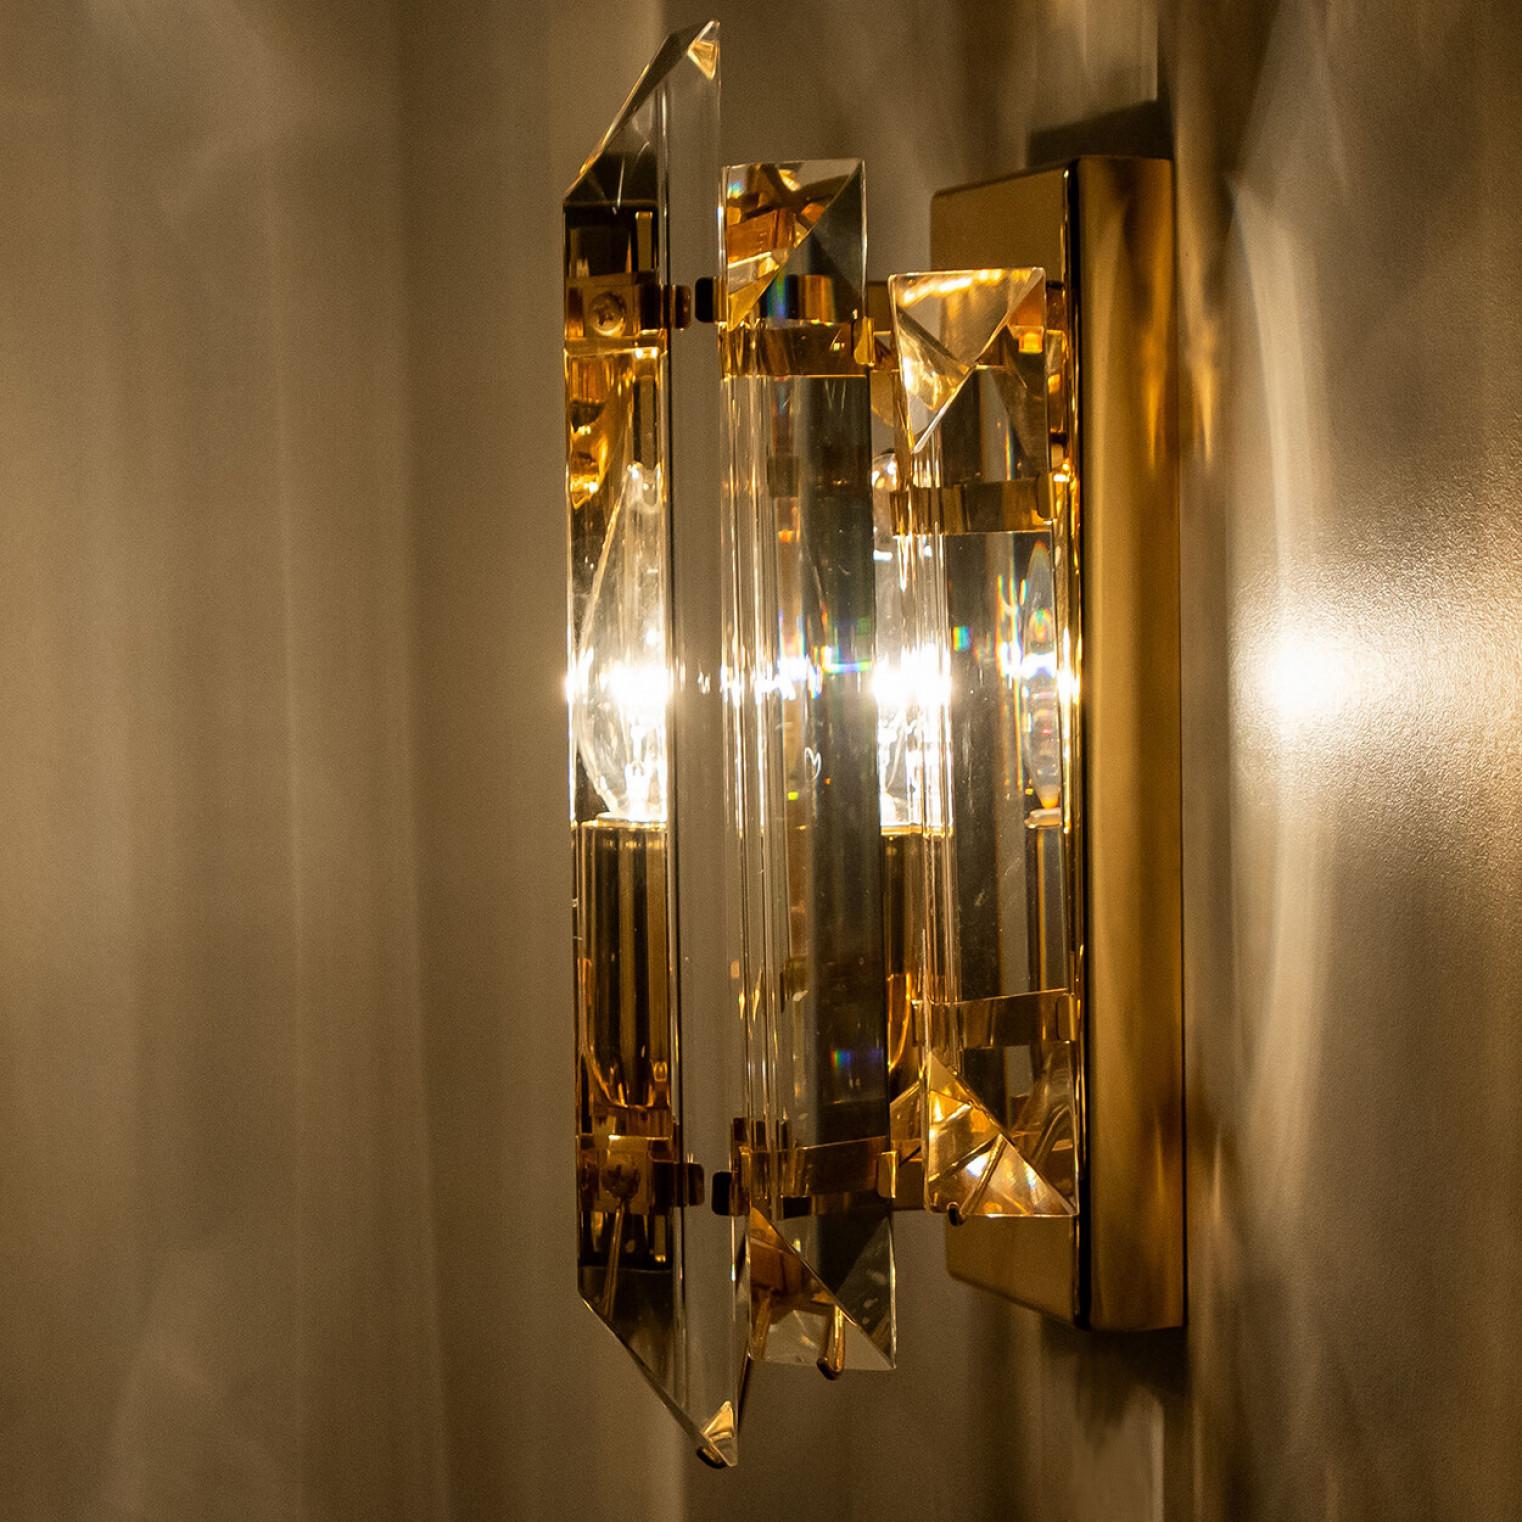 Beautiful tube shaped glass wall sconces featuring five long crystal clear glass tube-like rods, with brass details and back plate. Illuminates beautifully. High-end pieces.

Cleaned and well-wired, in full working order and ready to use. The brass